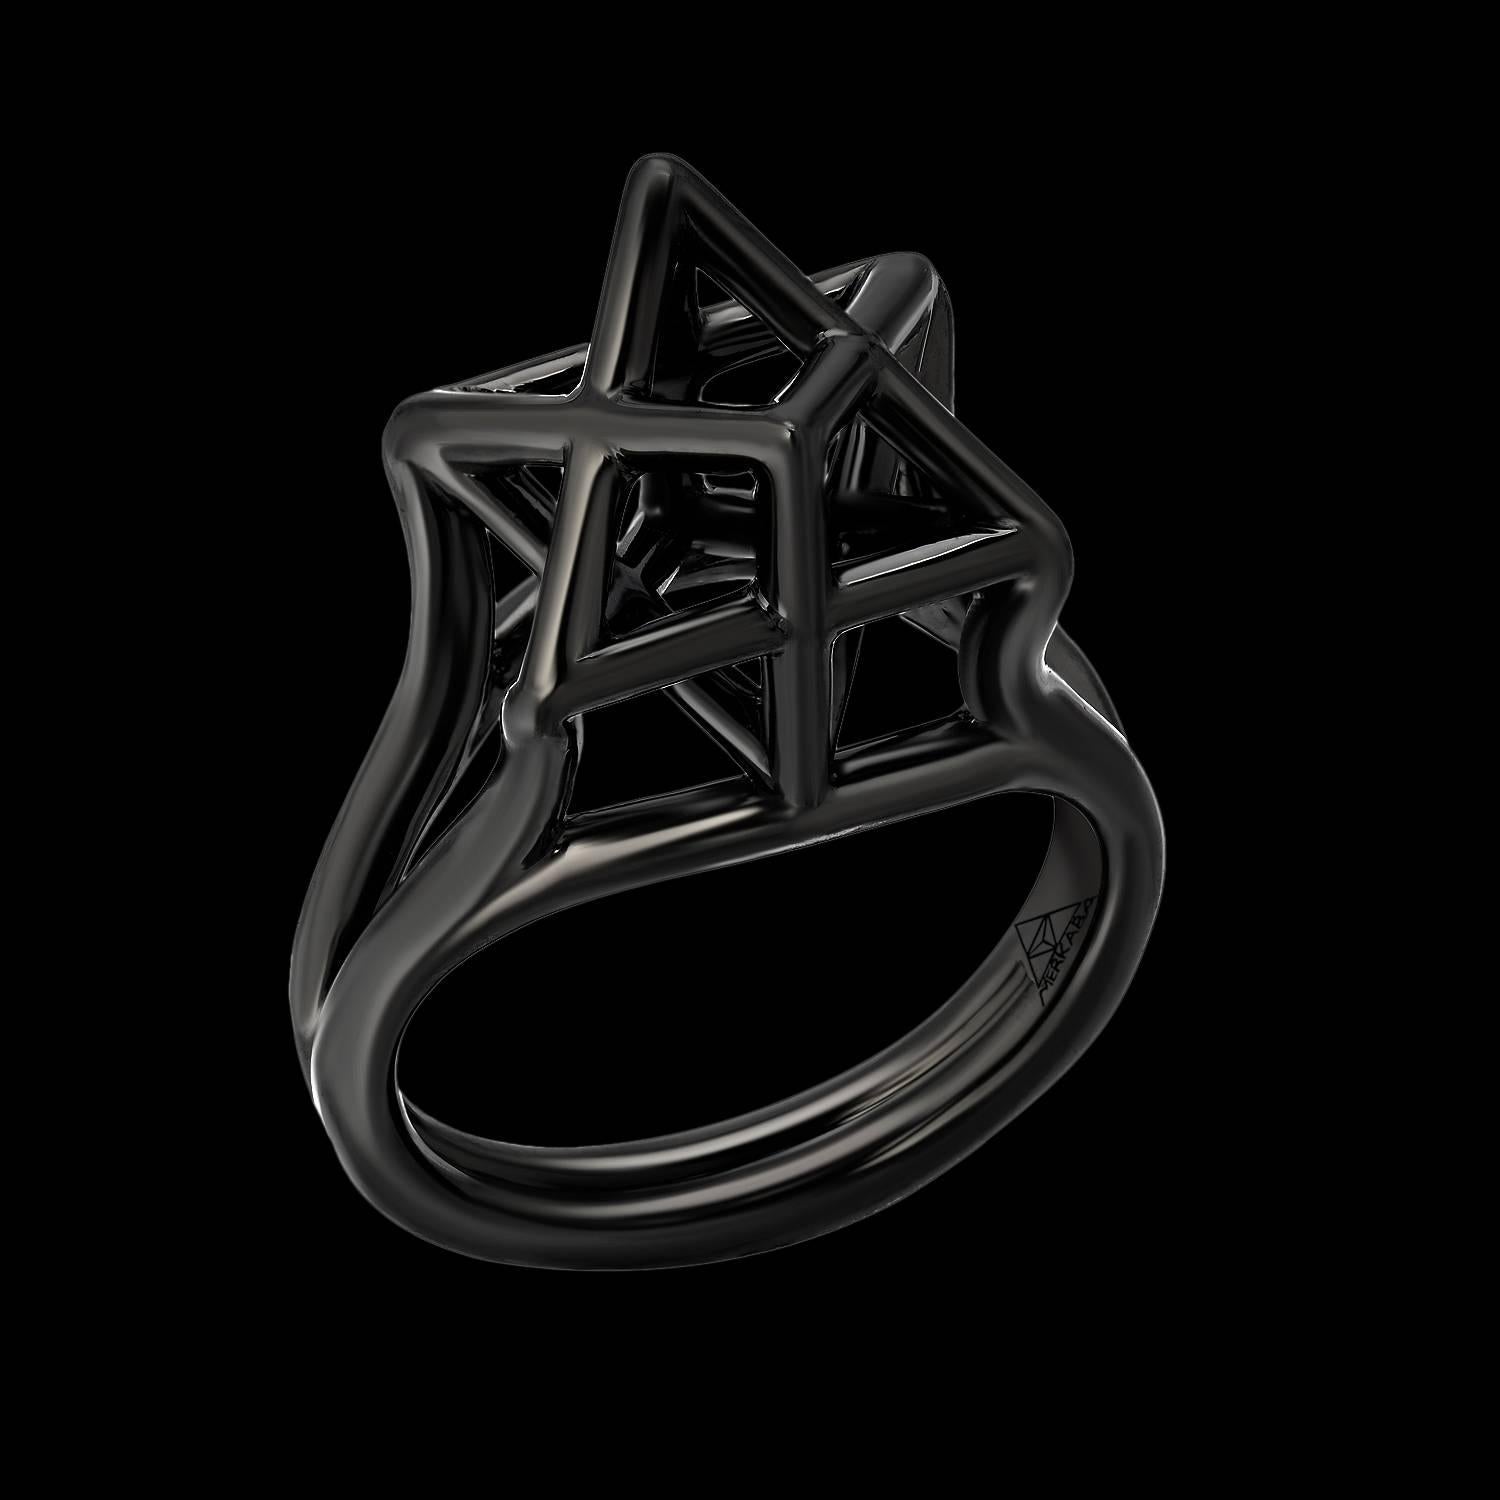 This Merkaba star tetrahedron, black-finished platinum ring, features a dramatic, sculptural design, extending upward from the hand, 0.43 inches, a stunning three-dimensional symbol of universal light.
Size 6. Can be sized to fit.
*Each piece comes